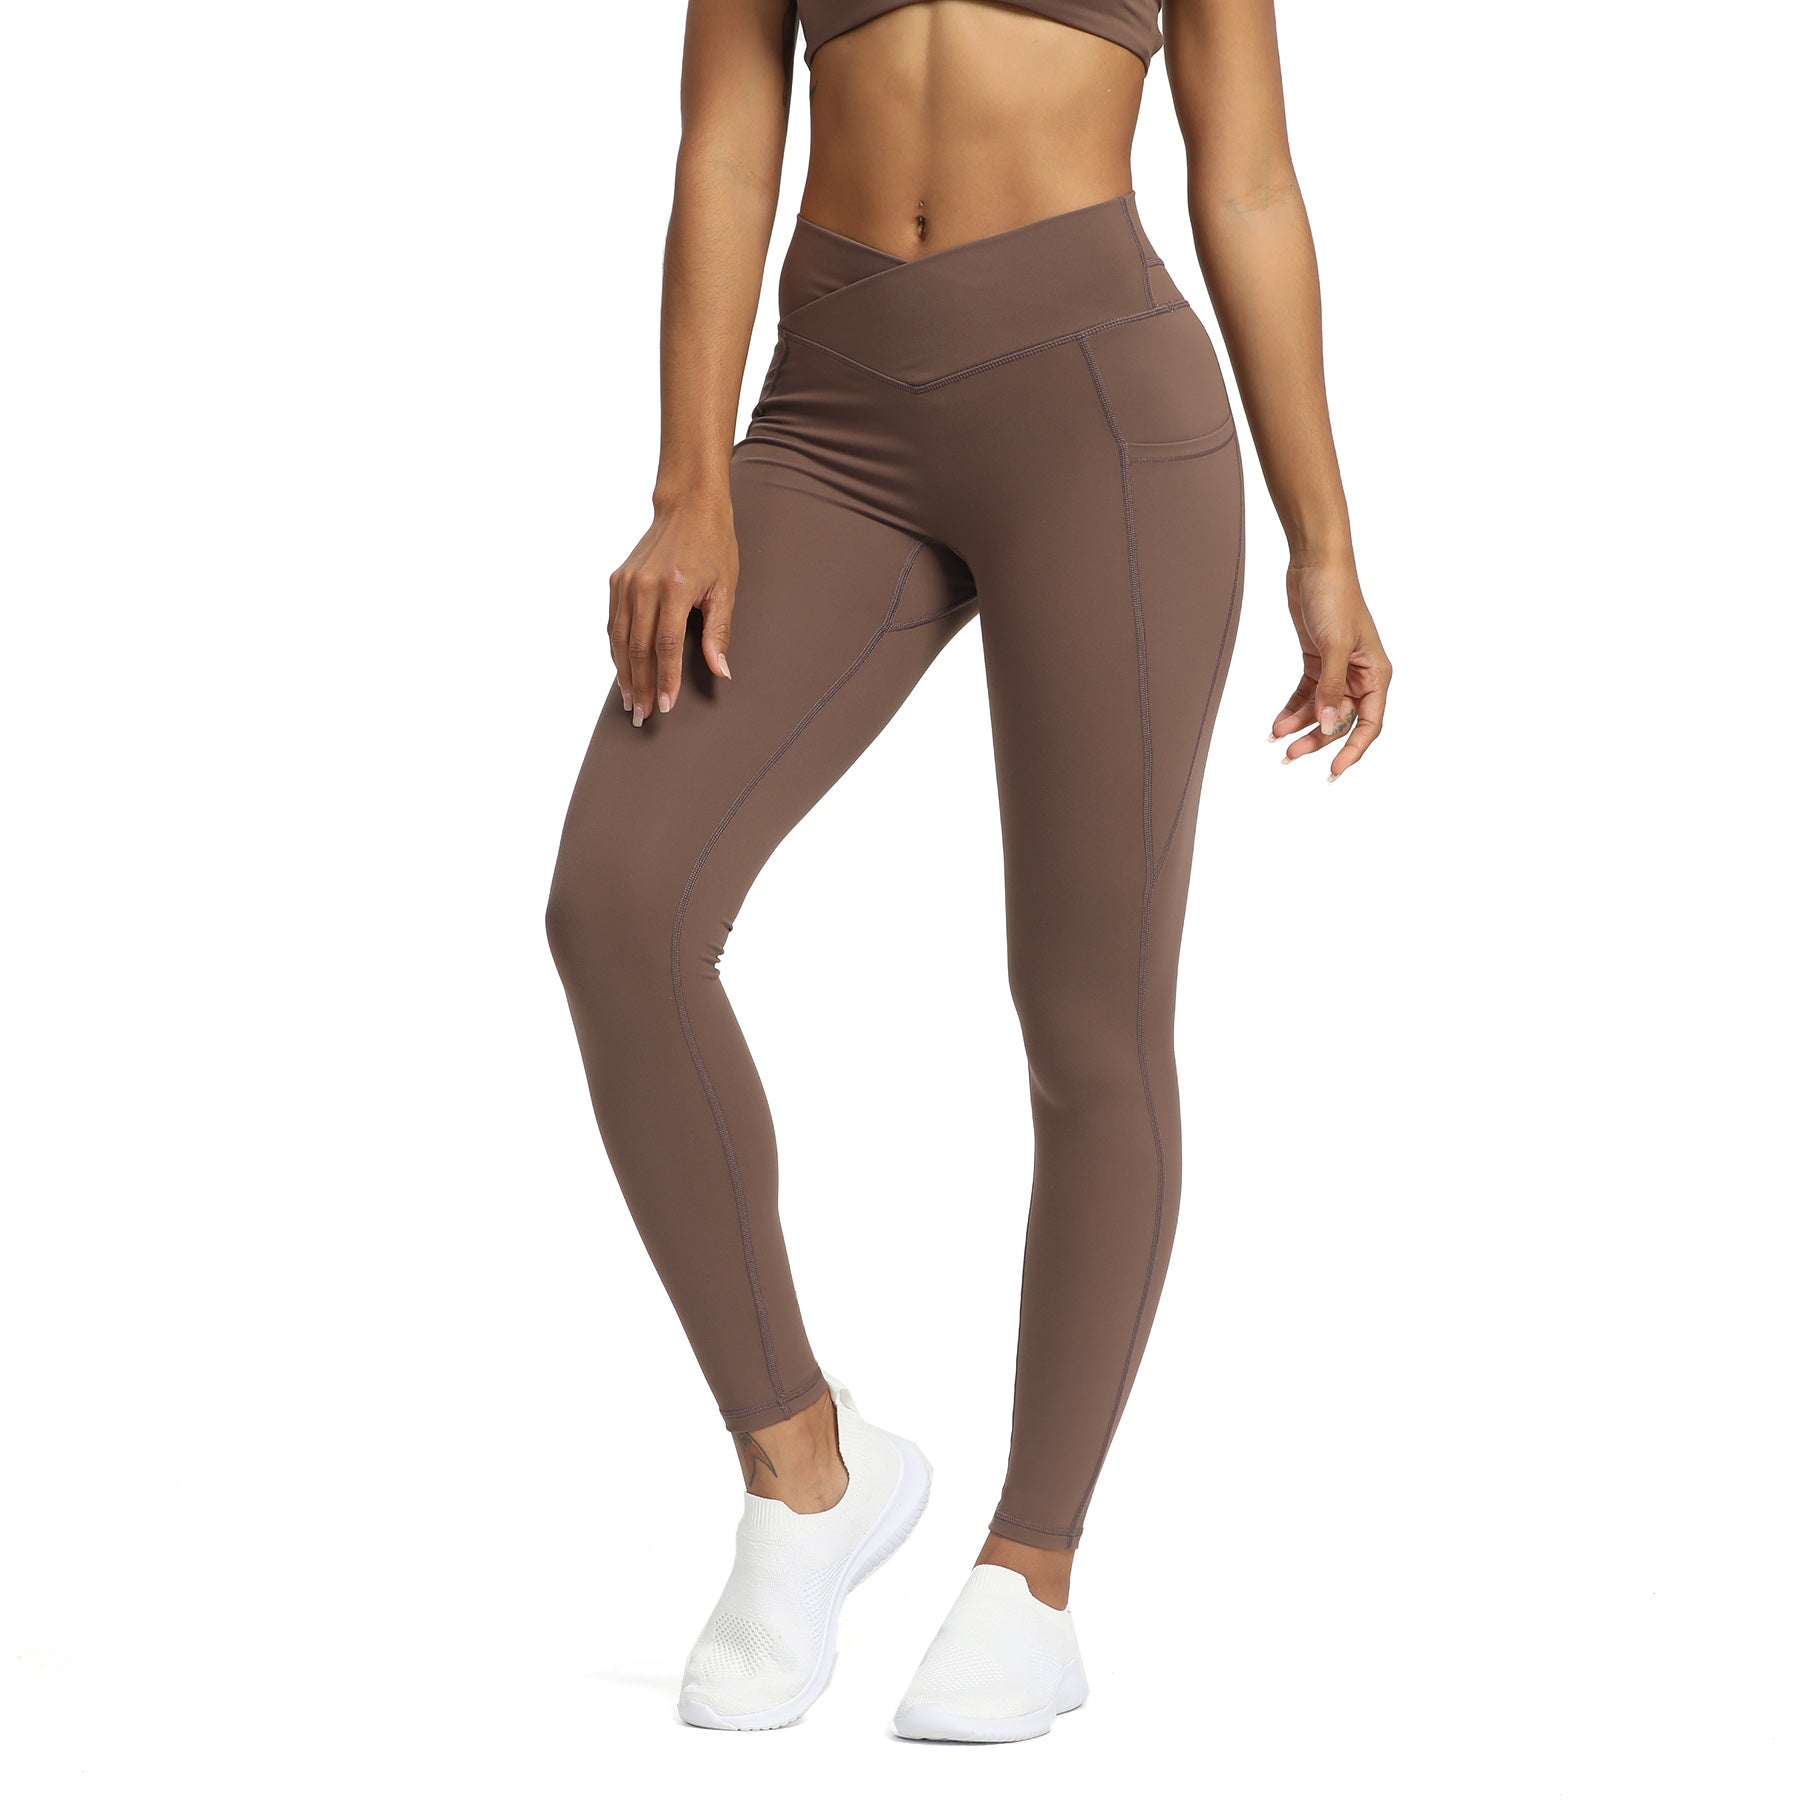 Aoxjox Trinity High Waisted Yoga Pants with Pockets for Women Tummy Control  Cross-Waist Crossover Workout Leggings, B Iron Grey (Regular Waistband),  Large : Buy Online at Best Price in KSA - Souq is now : Fashion